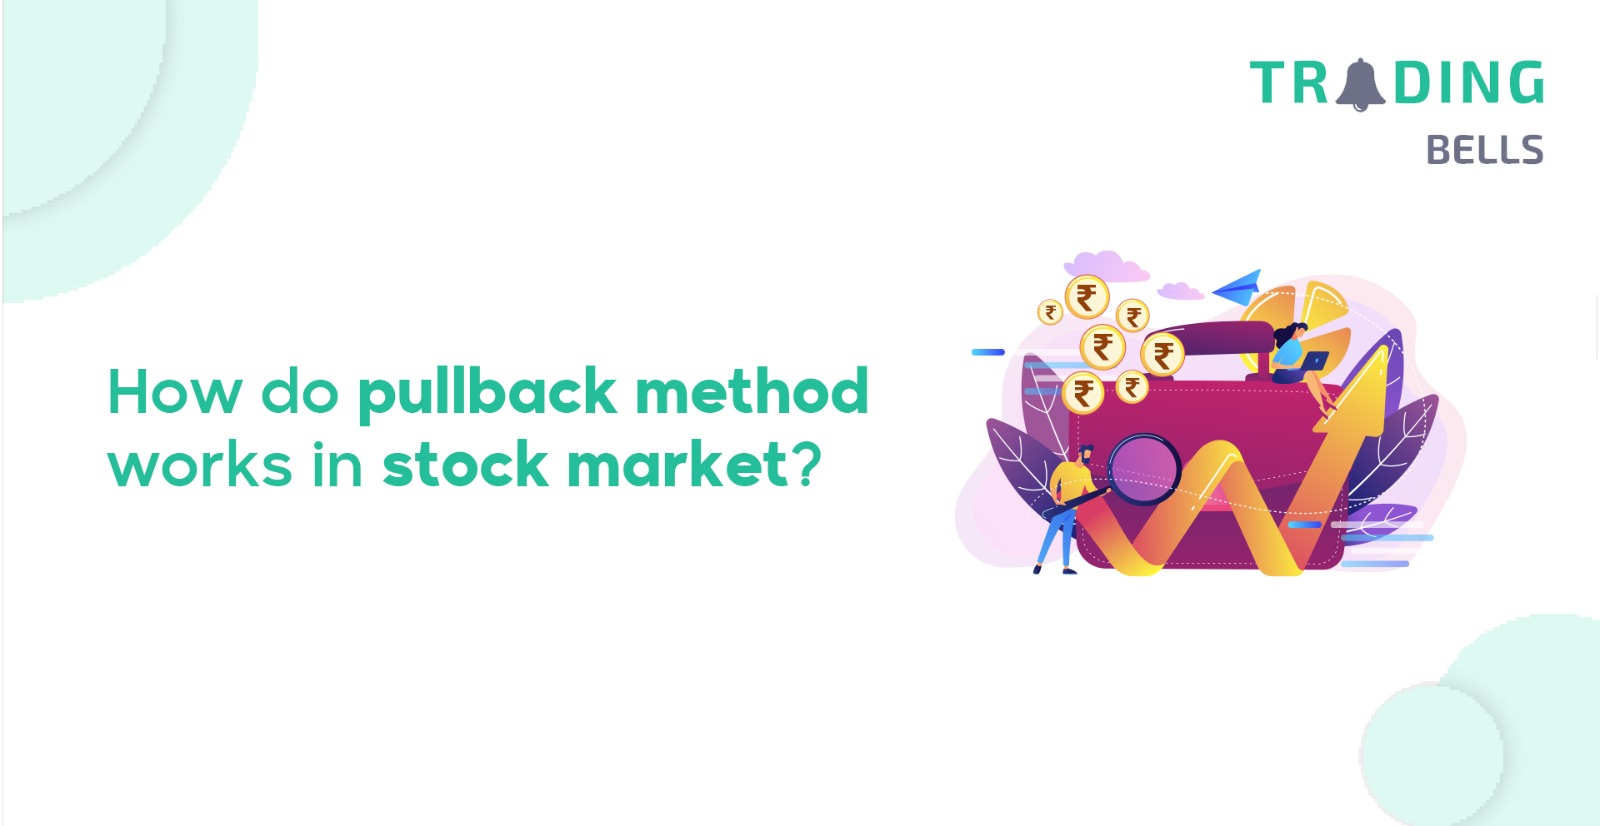 How does the pullback method work in the stock market?